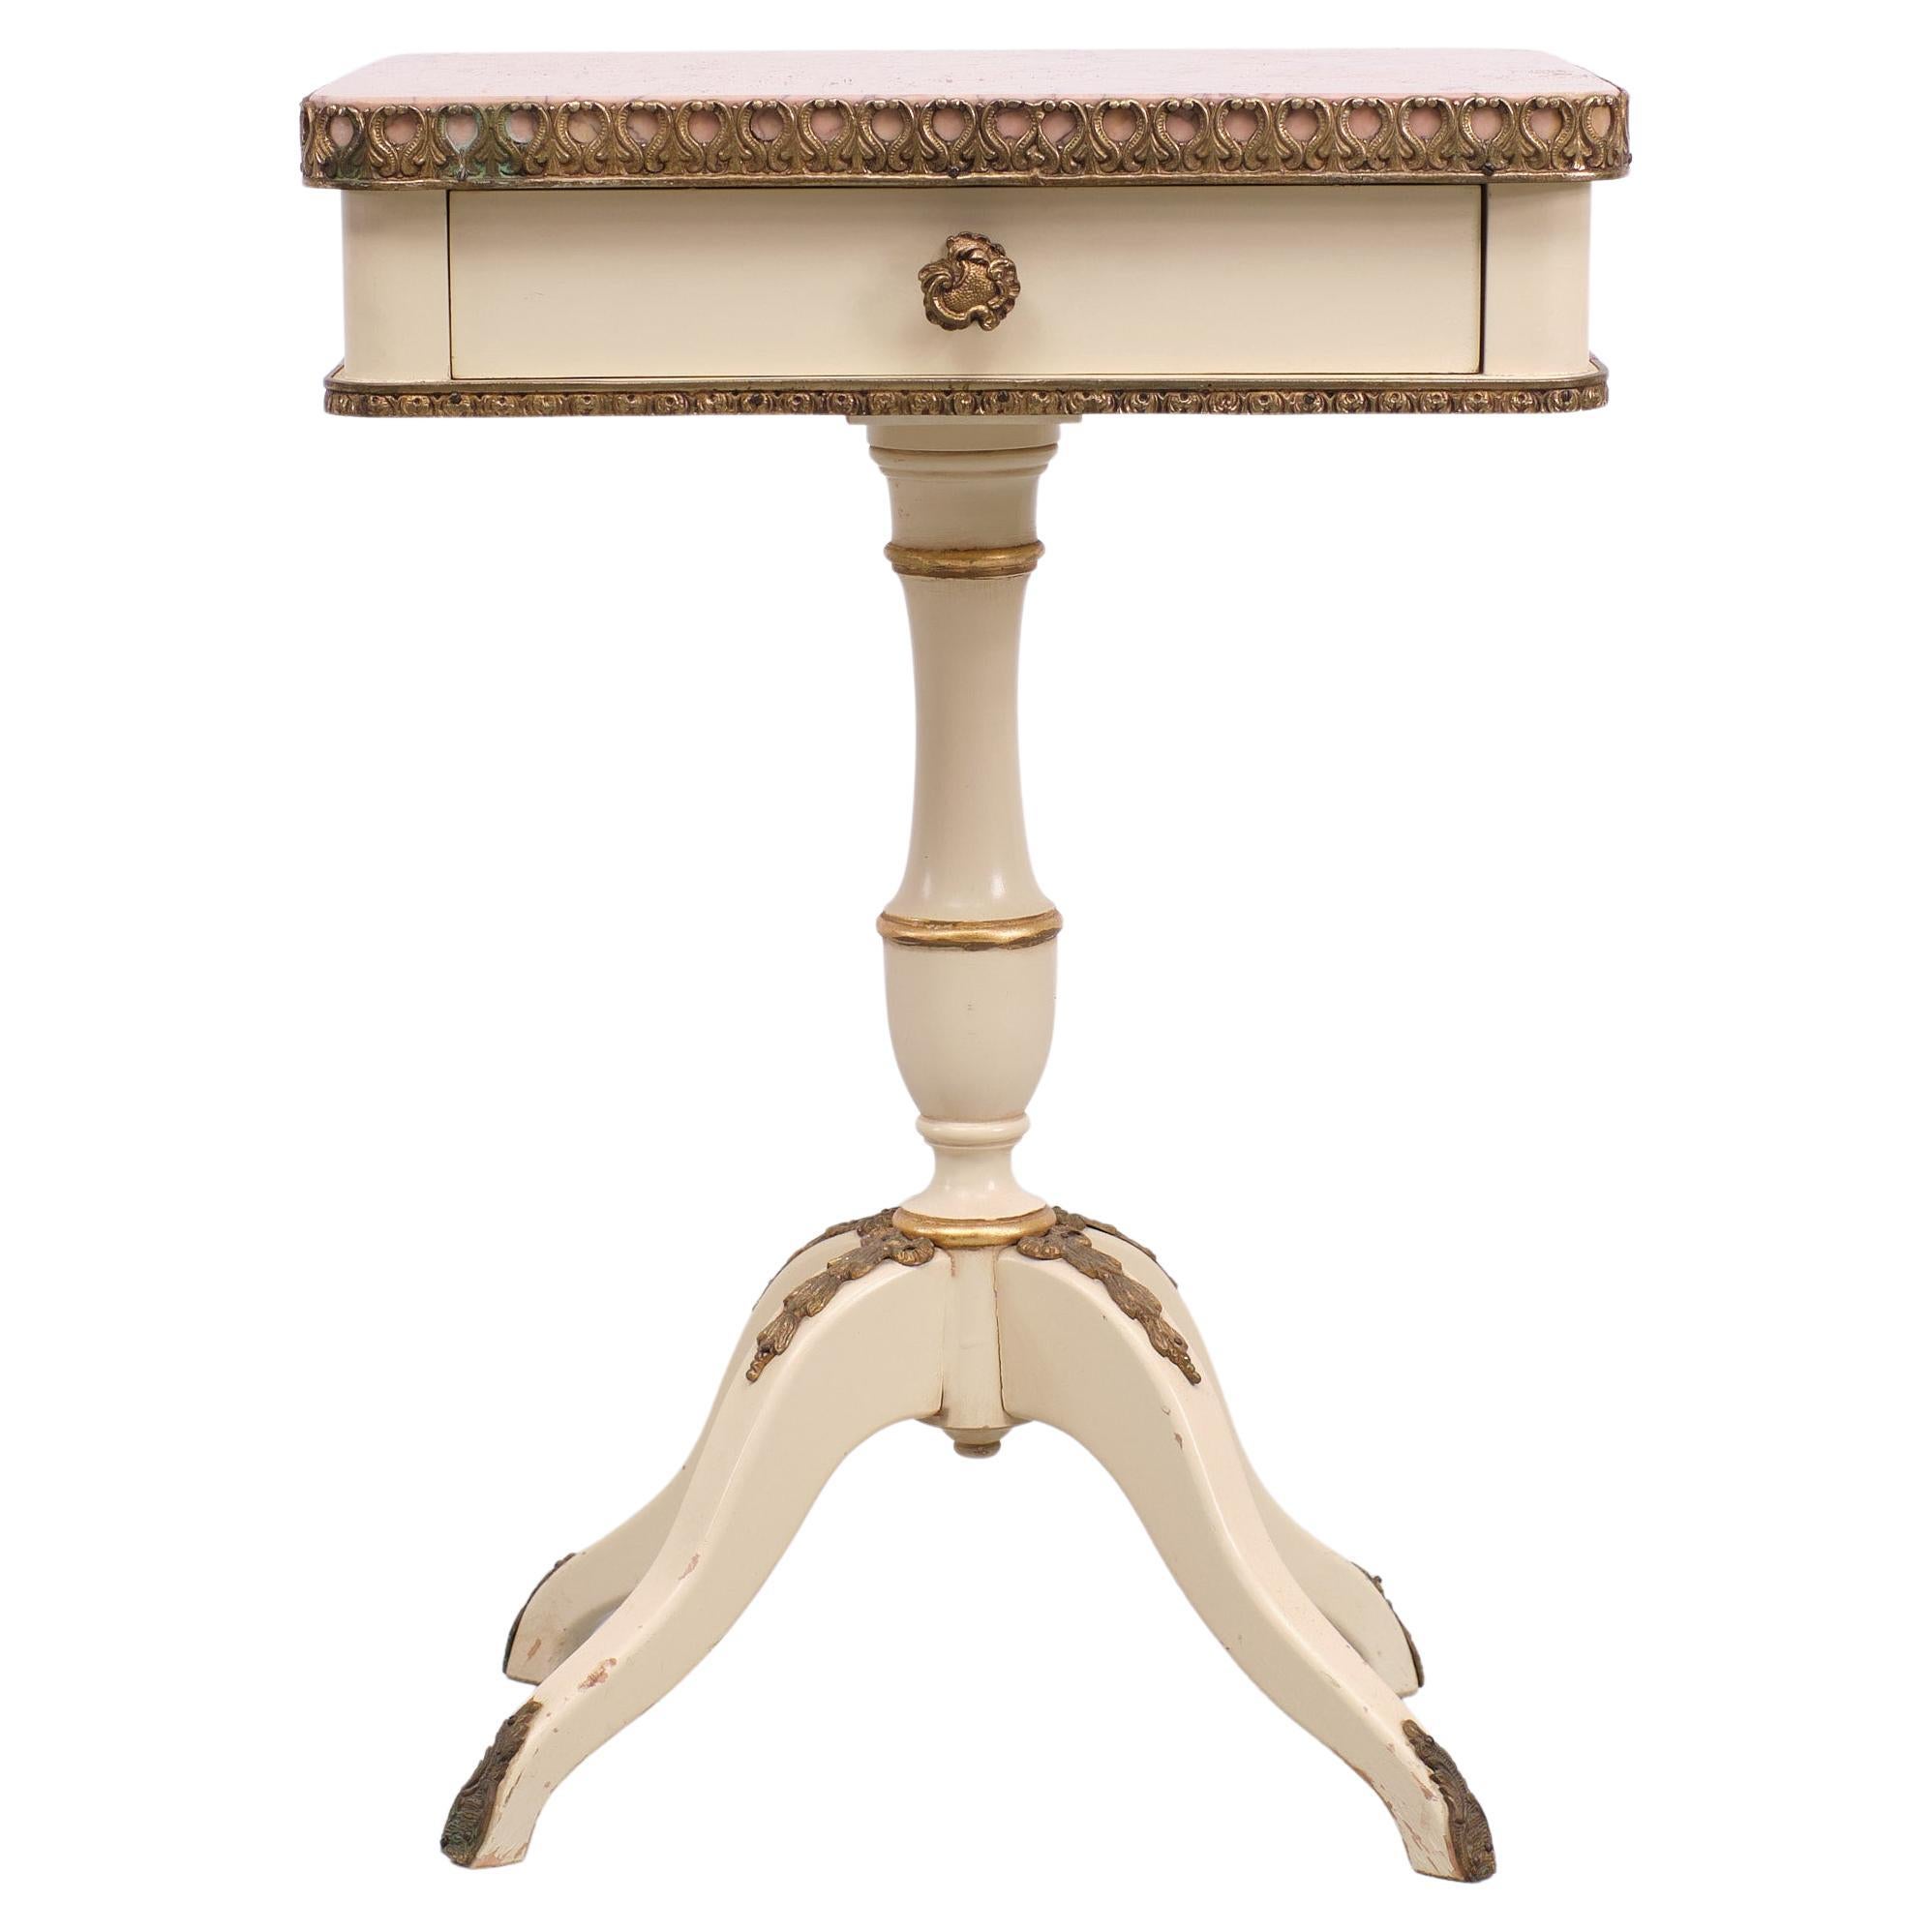 Very nice France Louis XV style side Table. Pink Marble top.
Bronze details. Creme color. 1 drawer. Good quality.